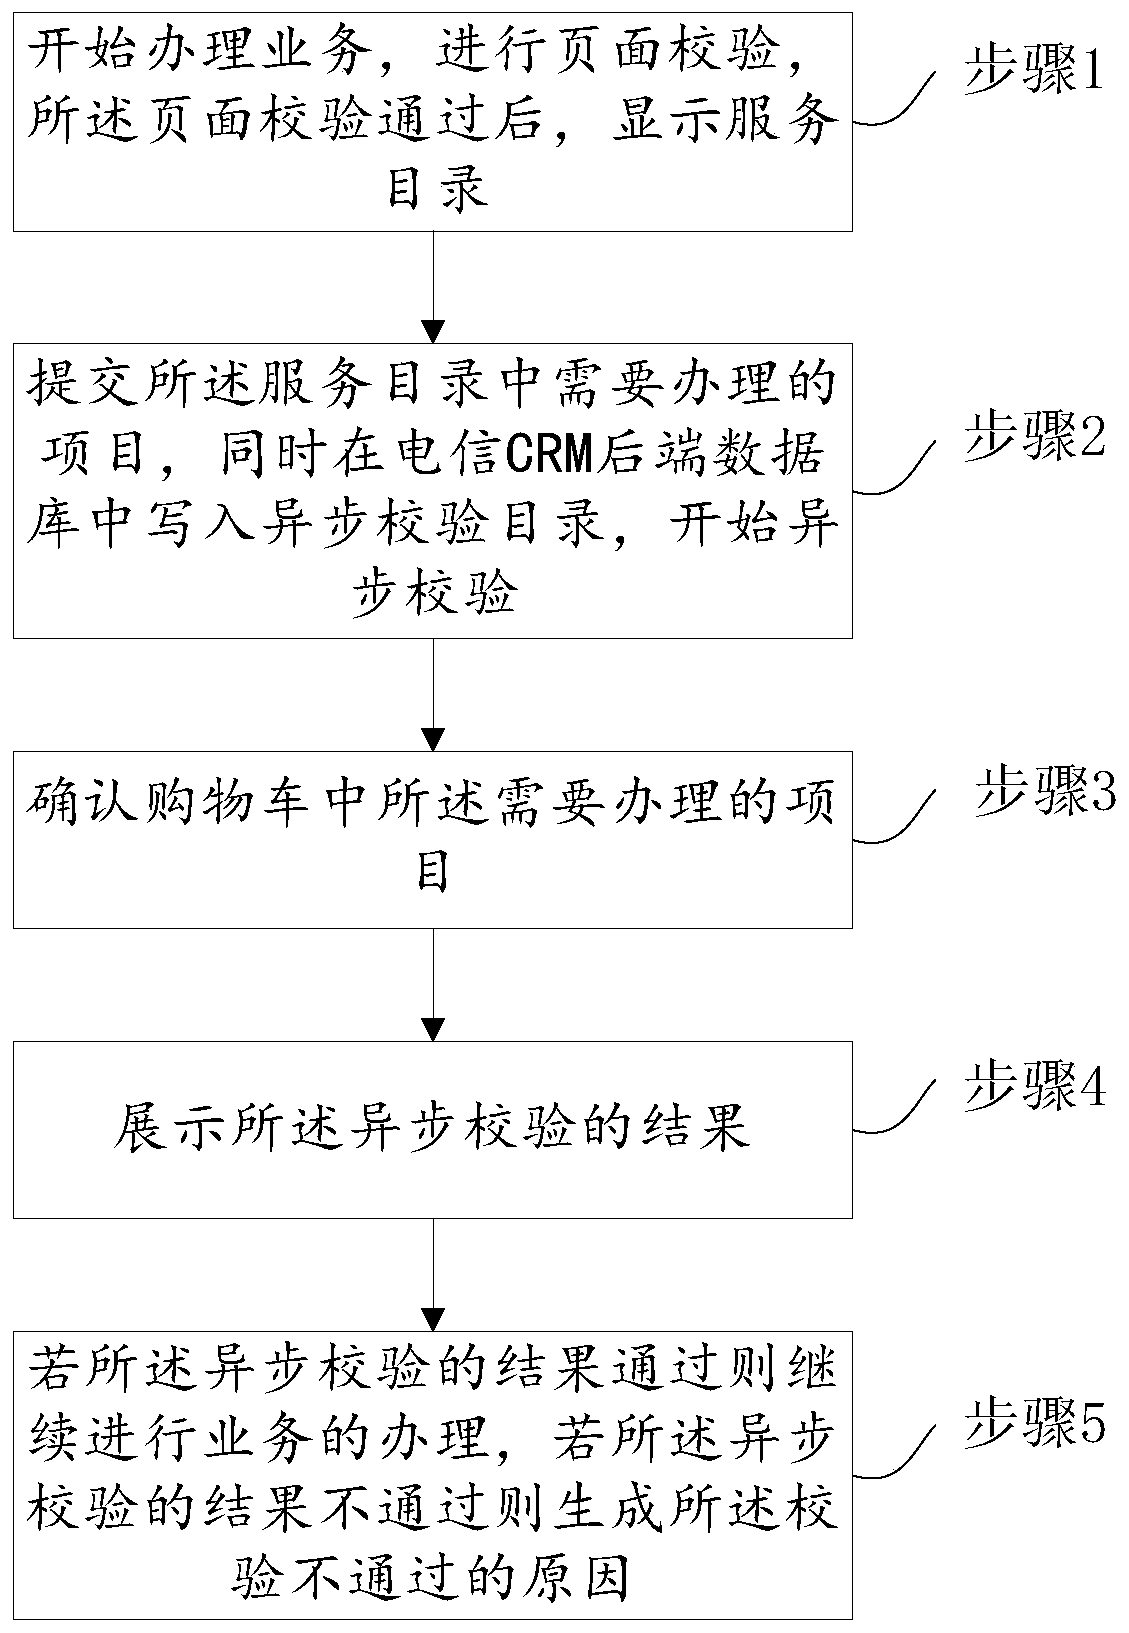 Method and system for achieving asynchronous verification of telecommunication CRM (customer relationship management) service handling